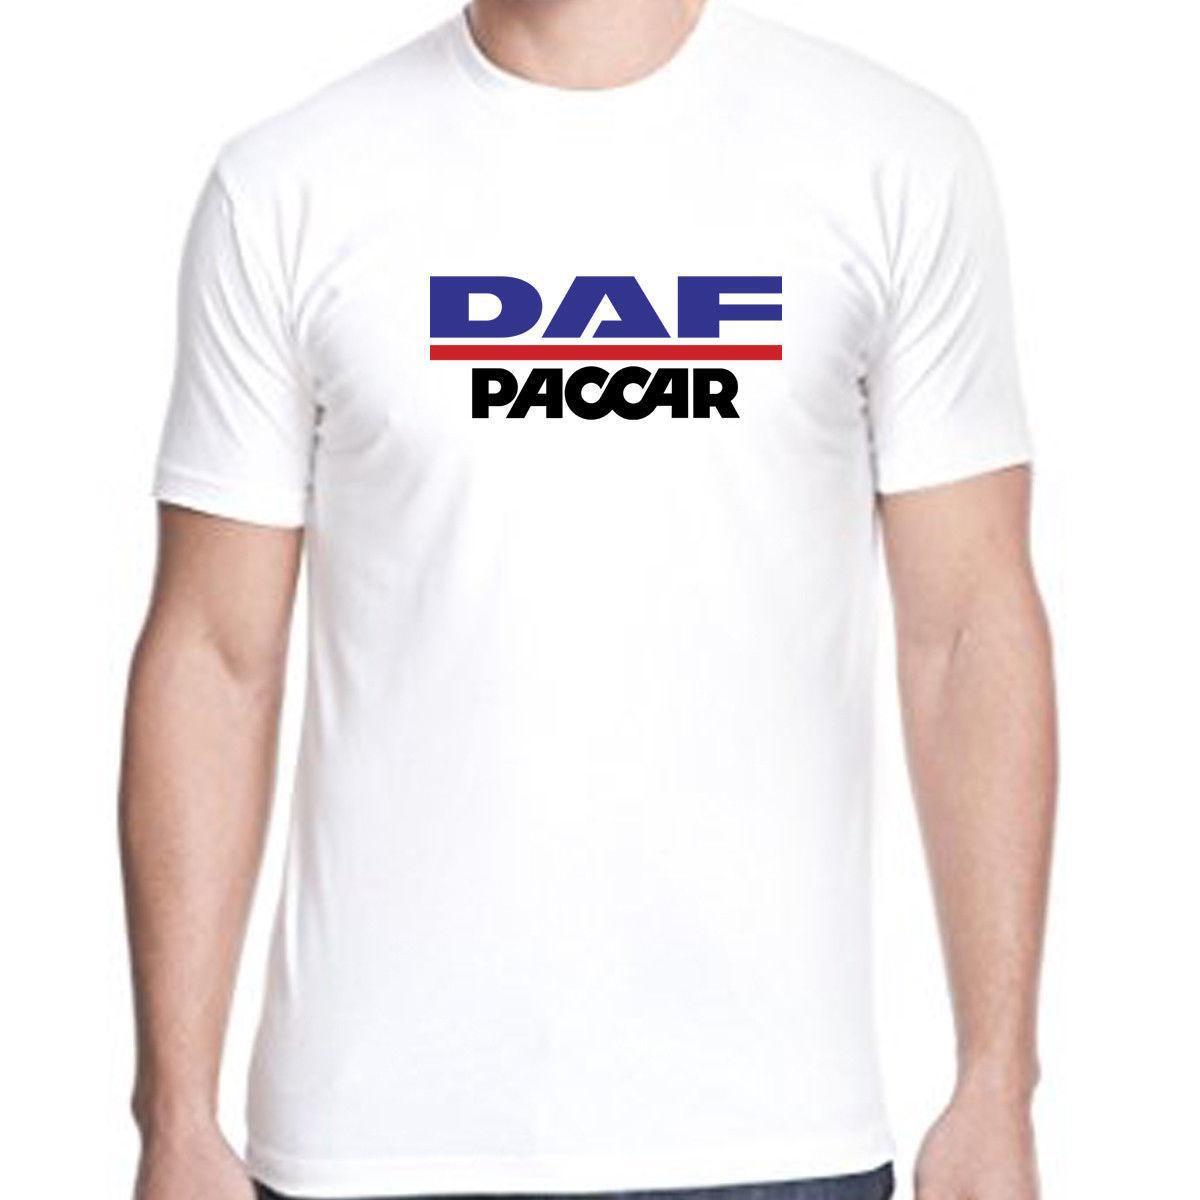 PACCAR Logo - DAF PACCAR LOGO TRUCK Personalized Tee Short Sleeve 100% Cotton ...